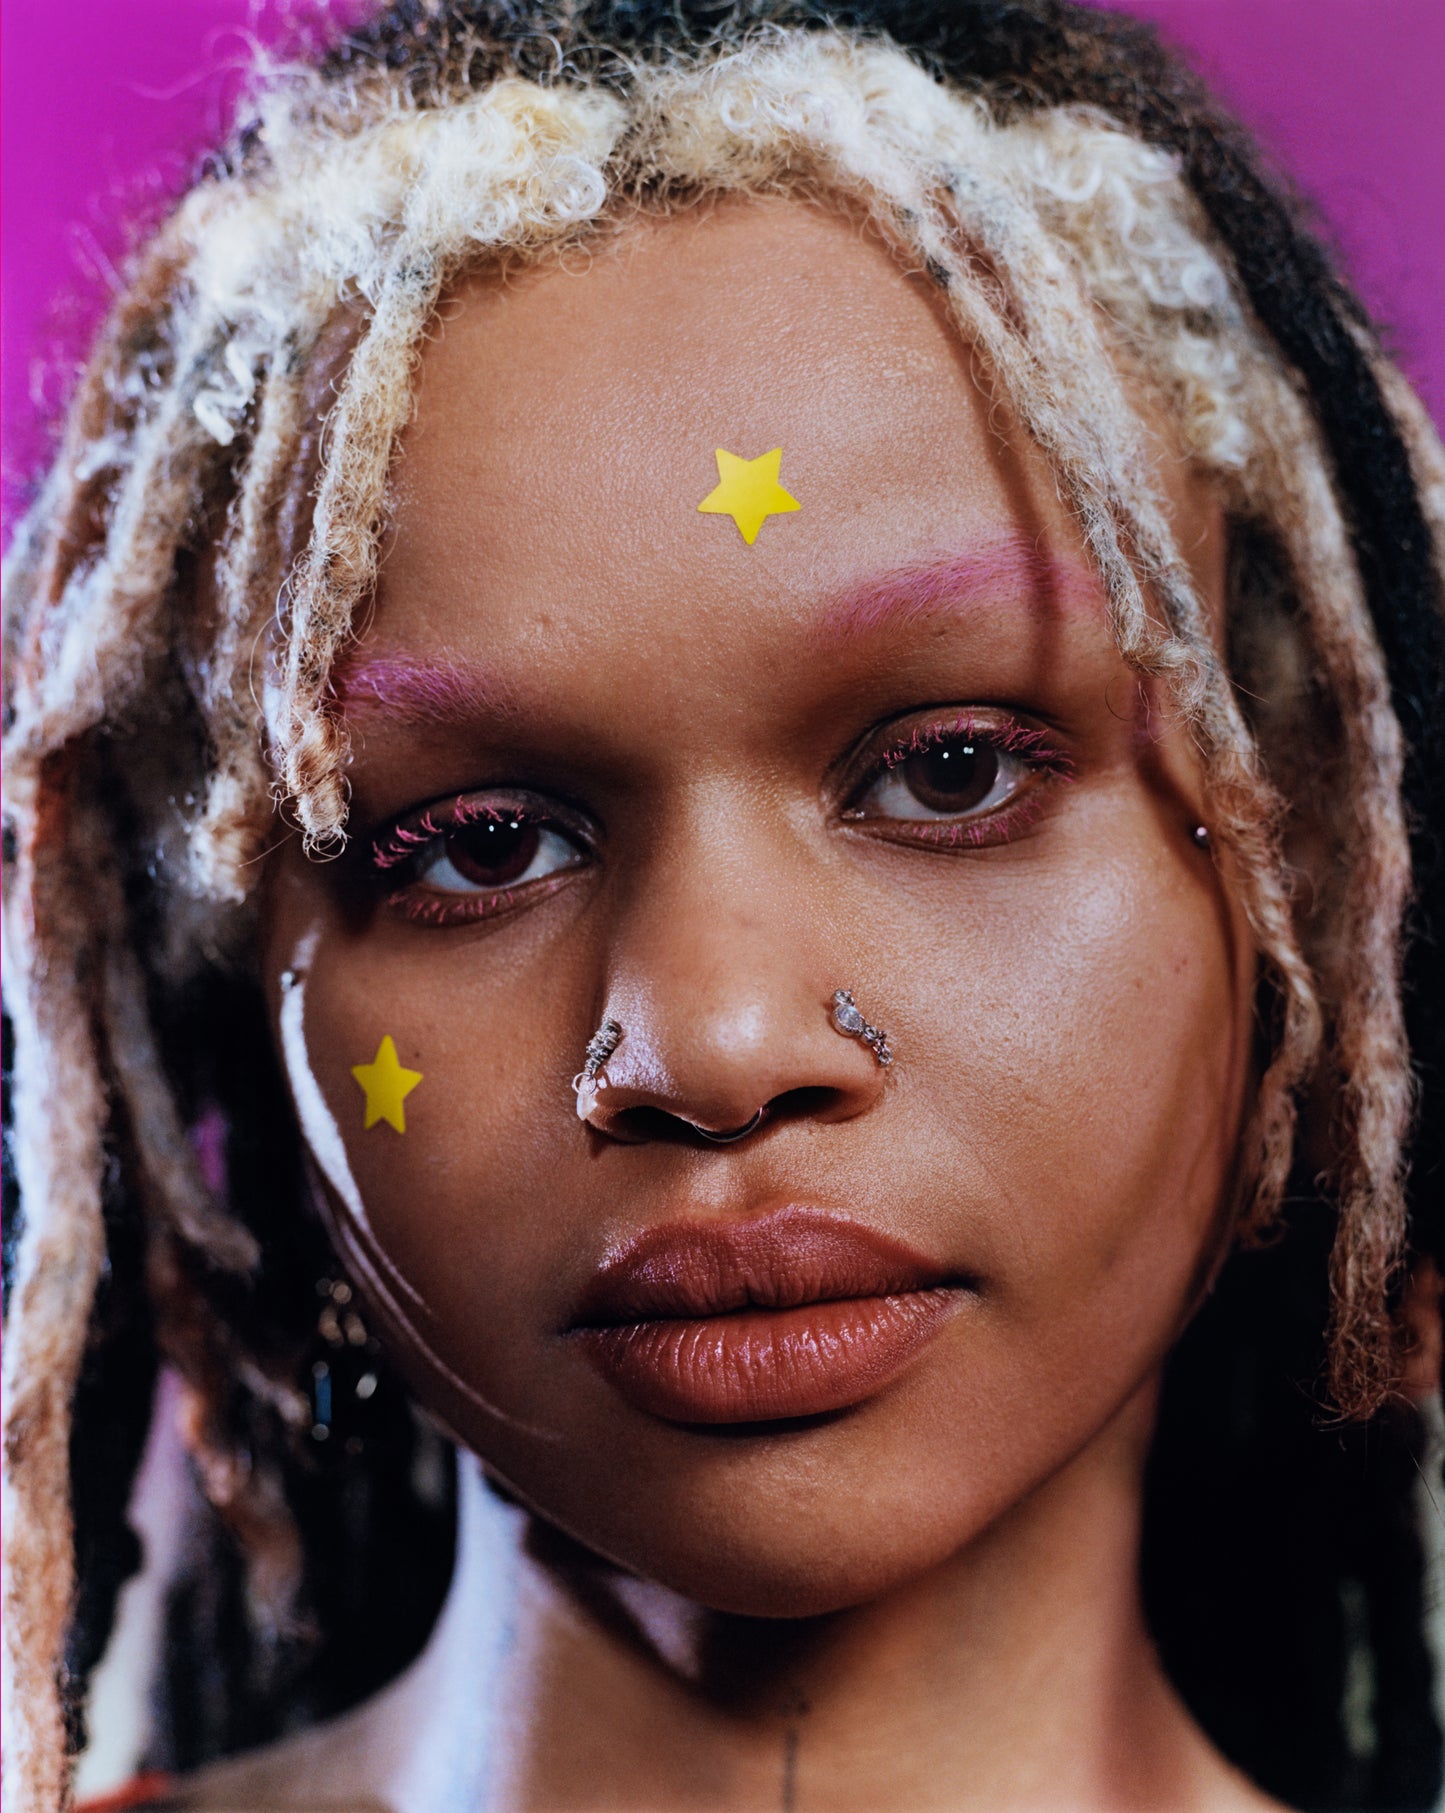 A young person with white and black hair, pink eyebrows, and two nose rings wears yellow Hydro-Star® patches on their cheek and forehead.